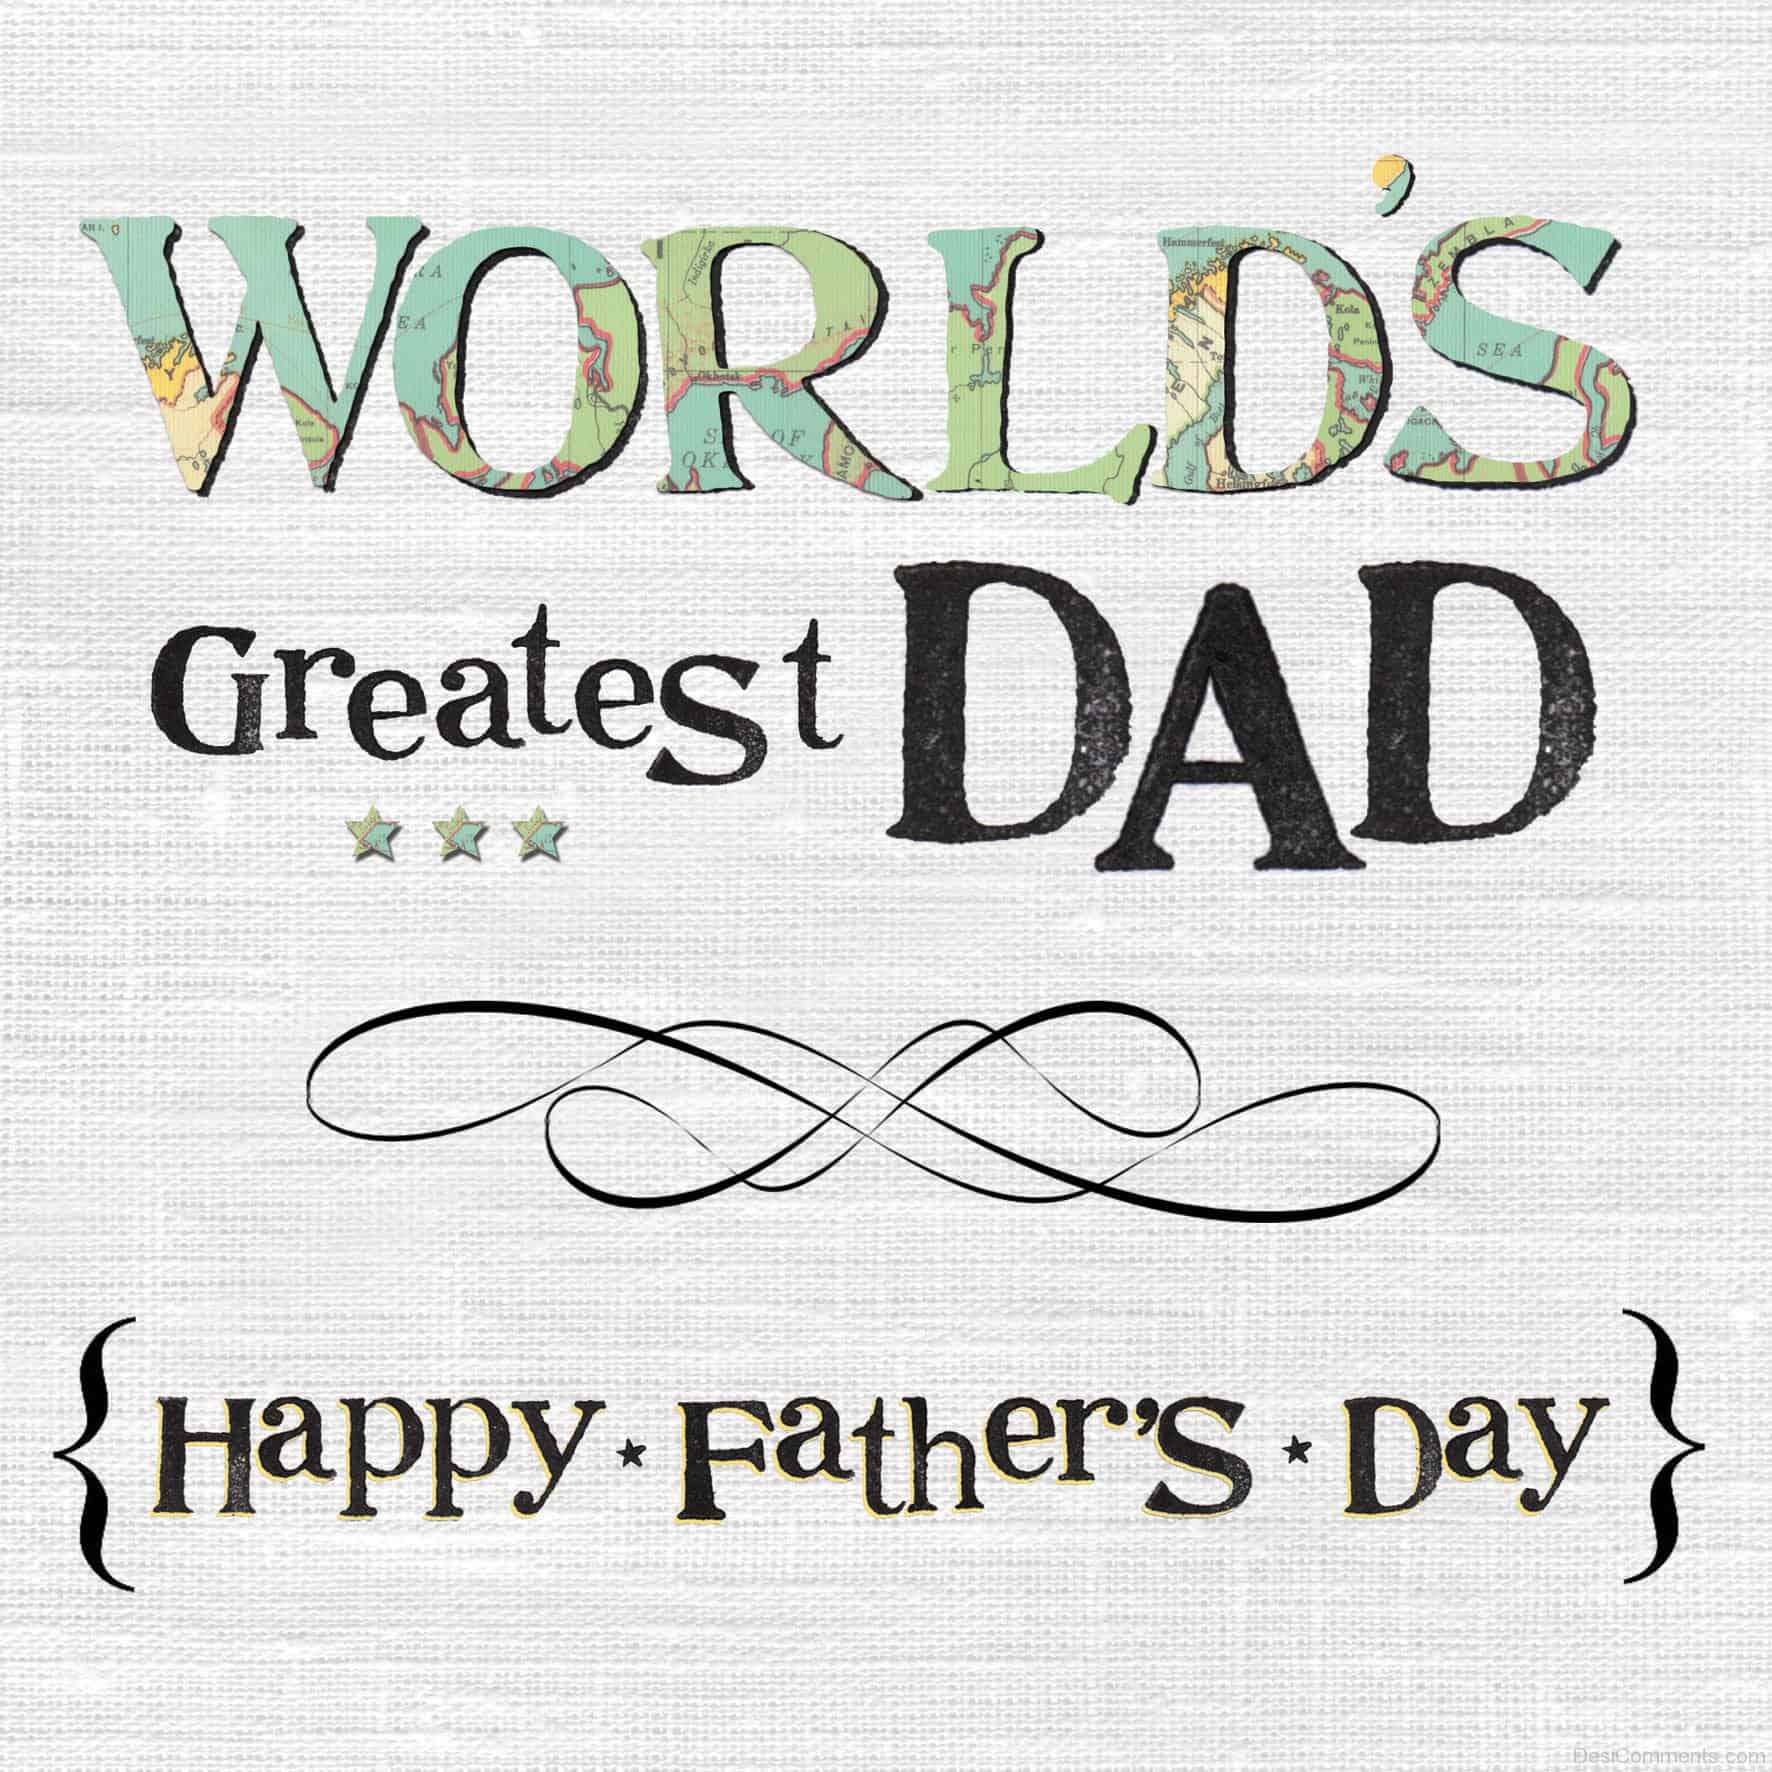 Fathers-Day-Images-1